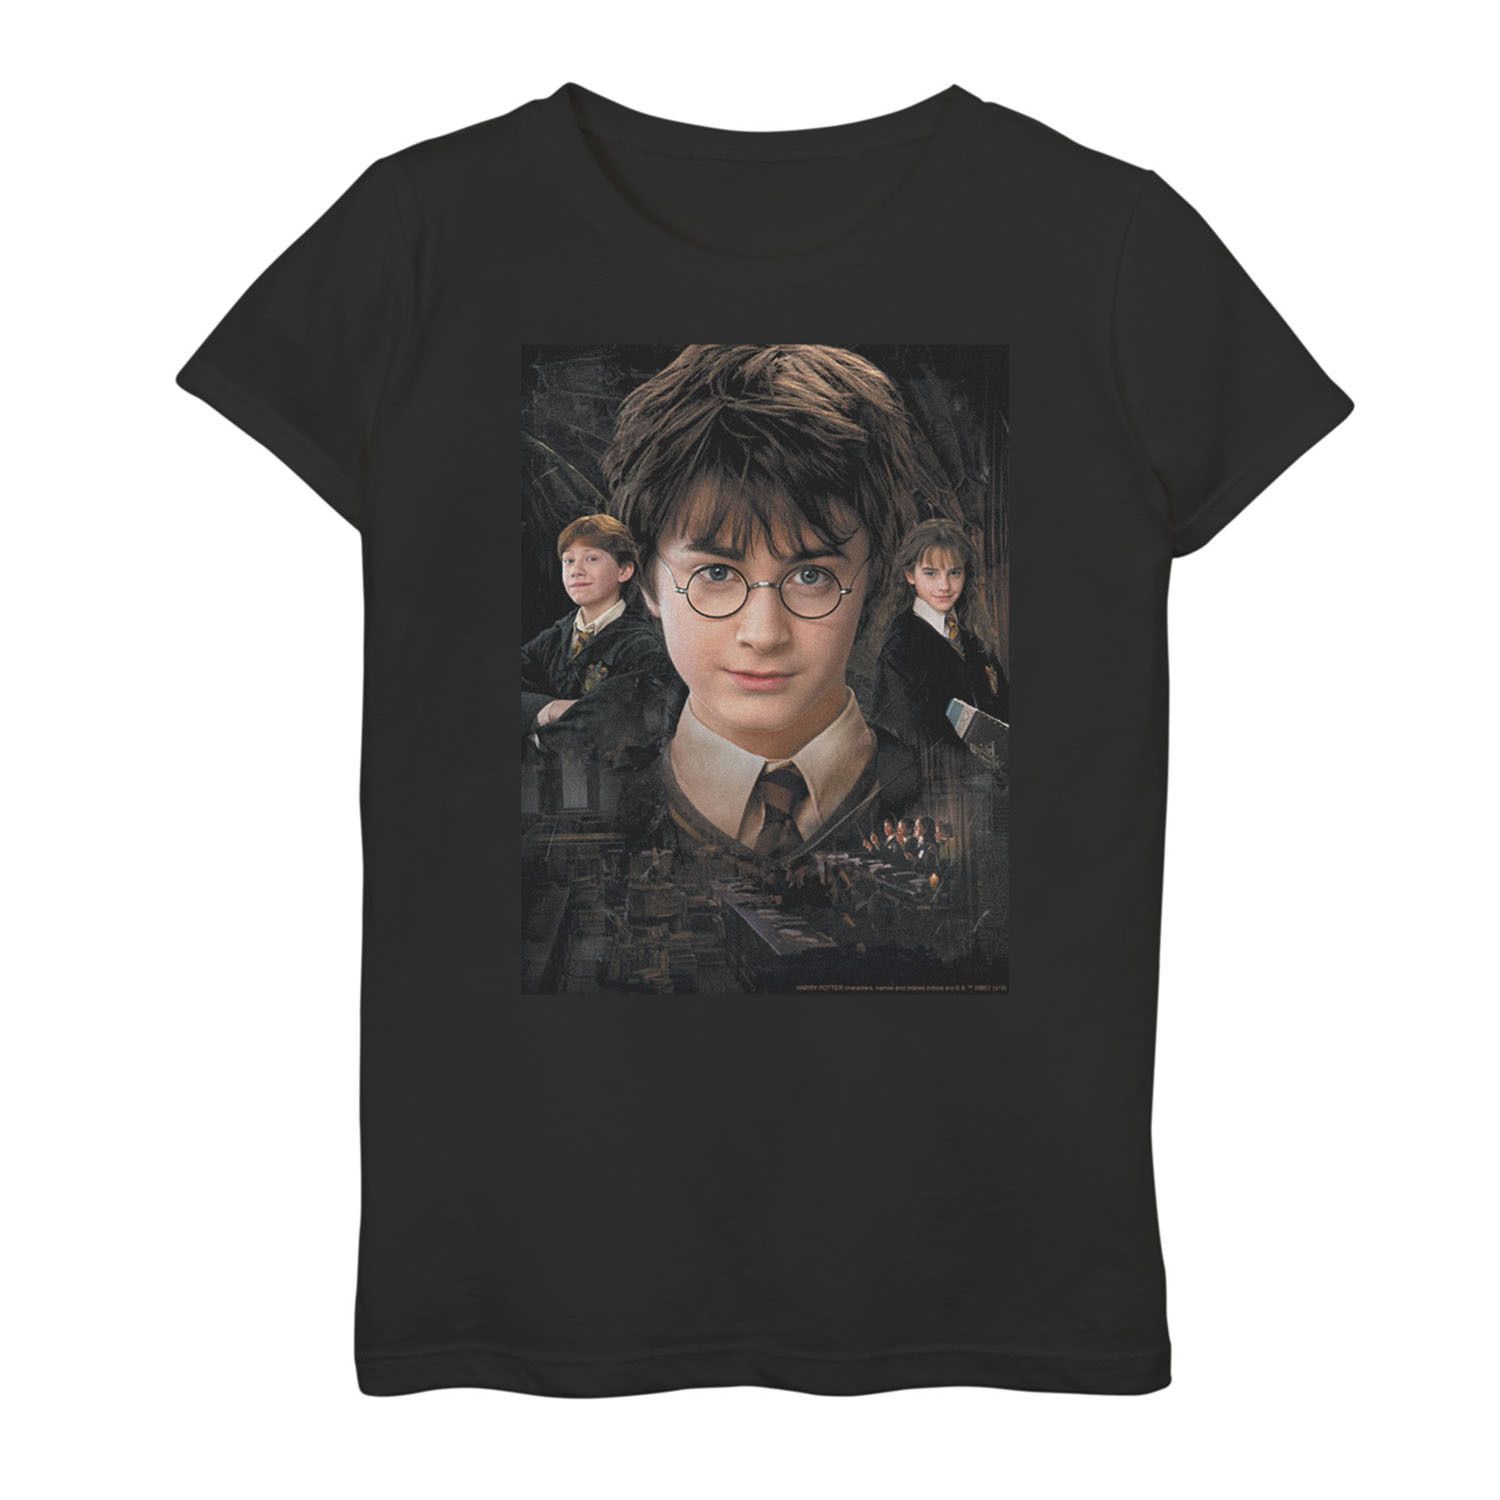 Image for Harry Potter Girls 7-16 Chamber Of Secrets Graphic Tee at Kohl's.